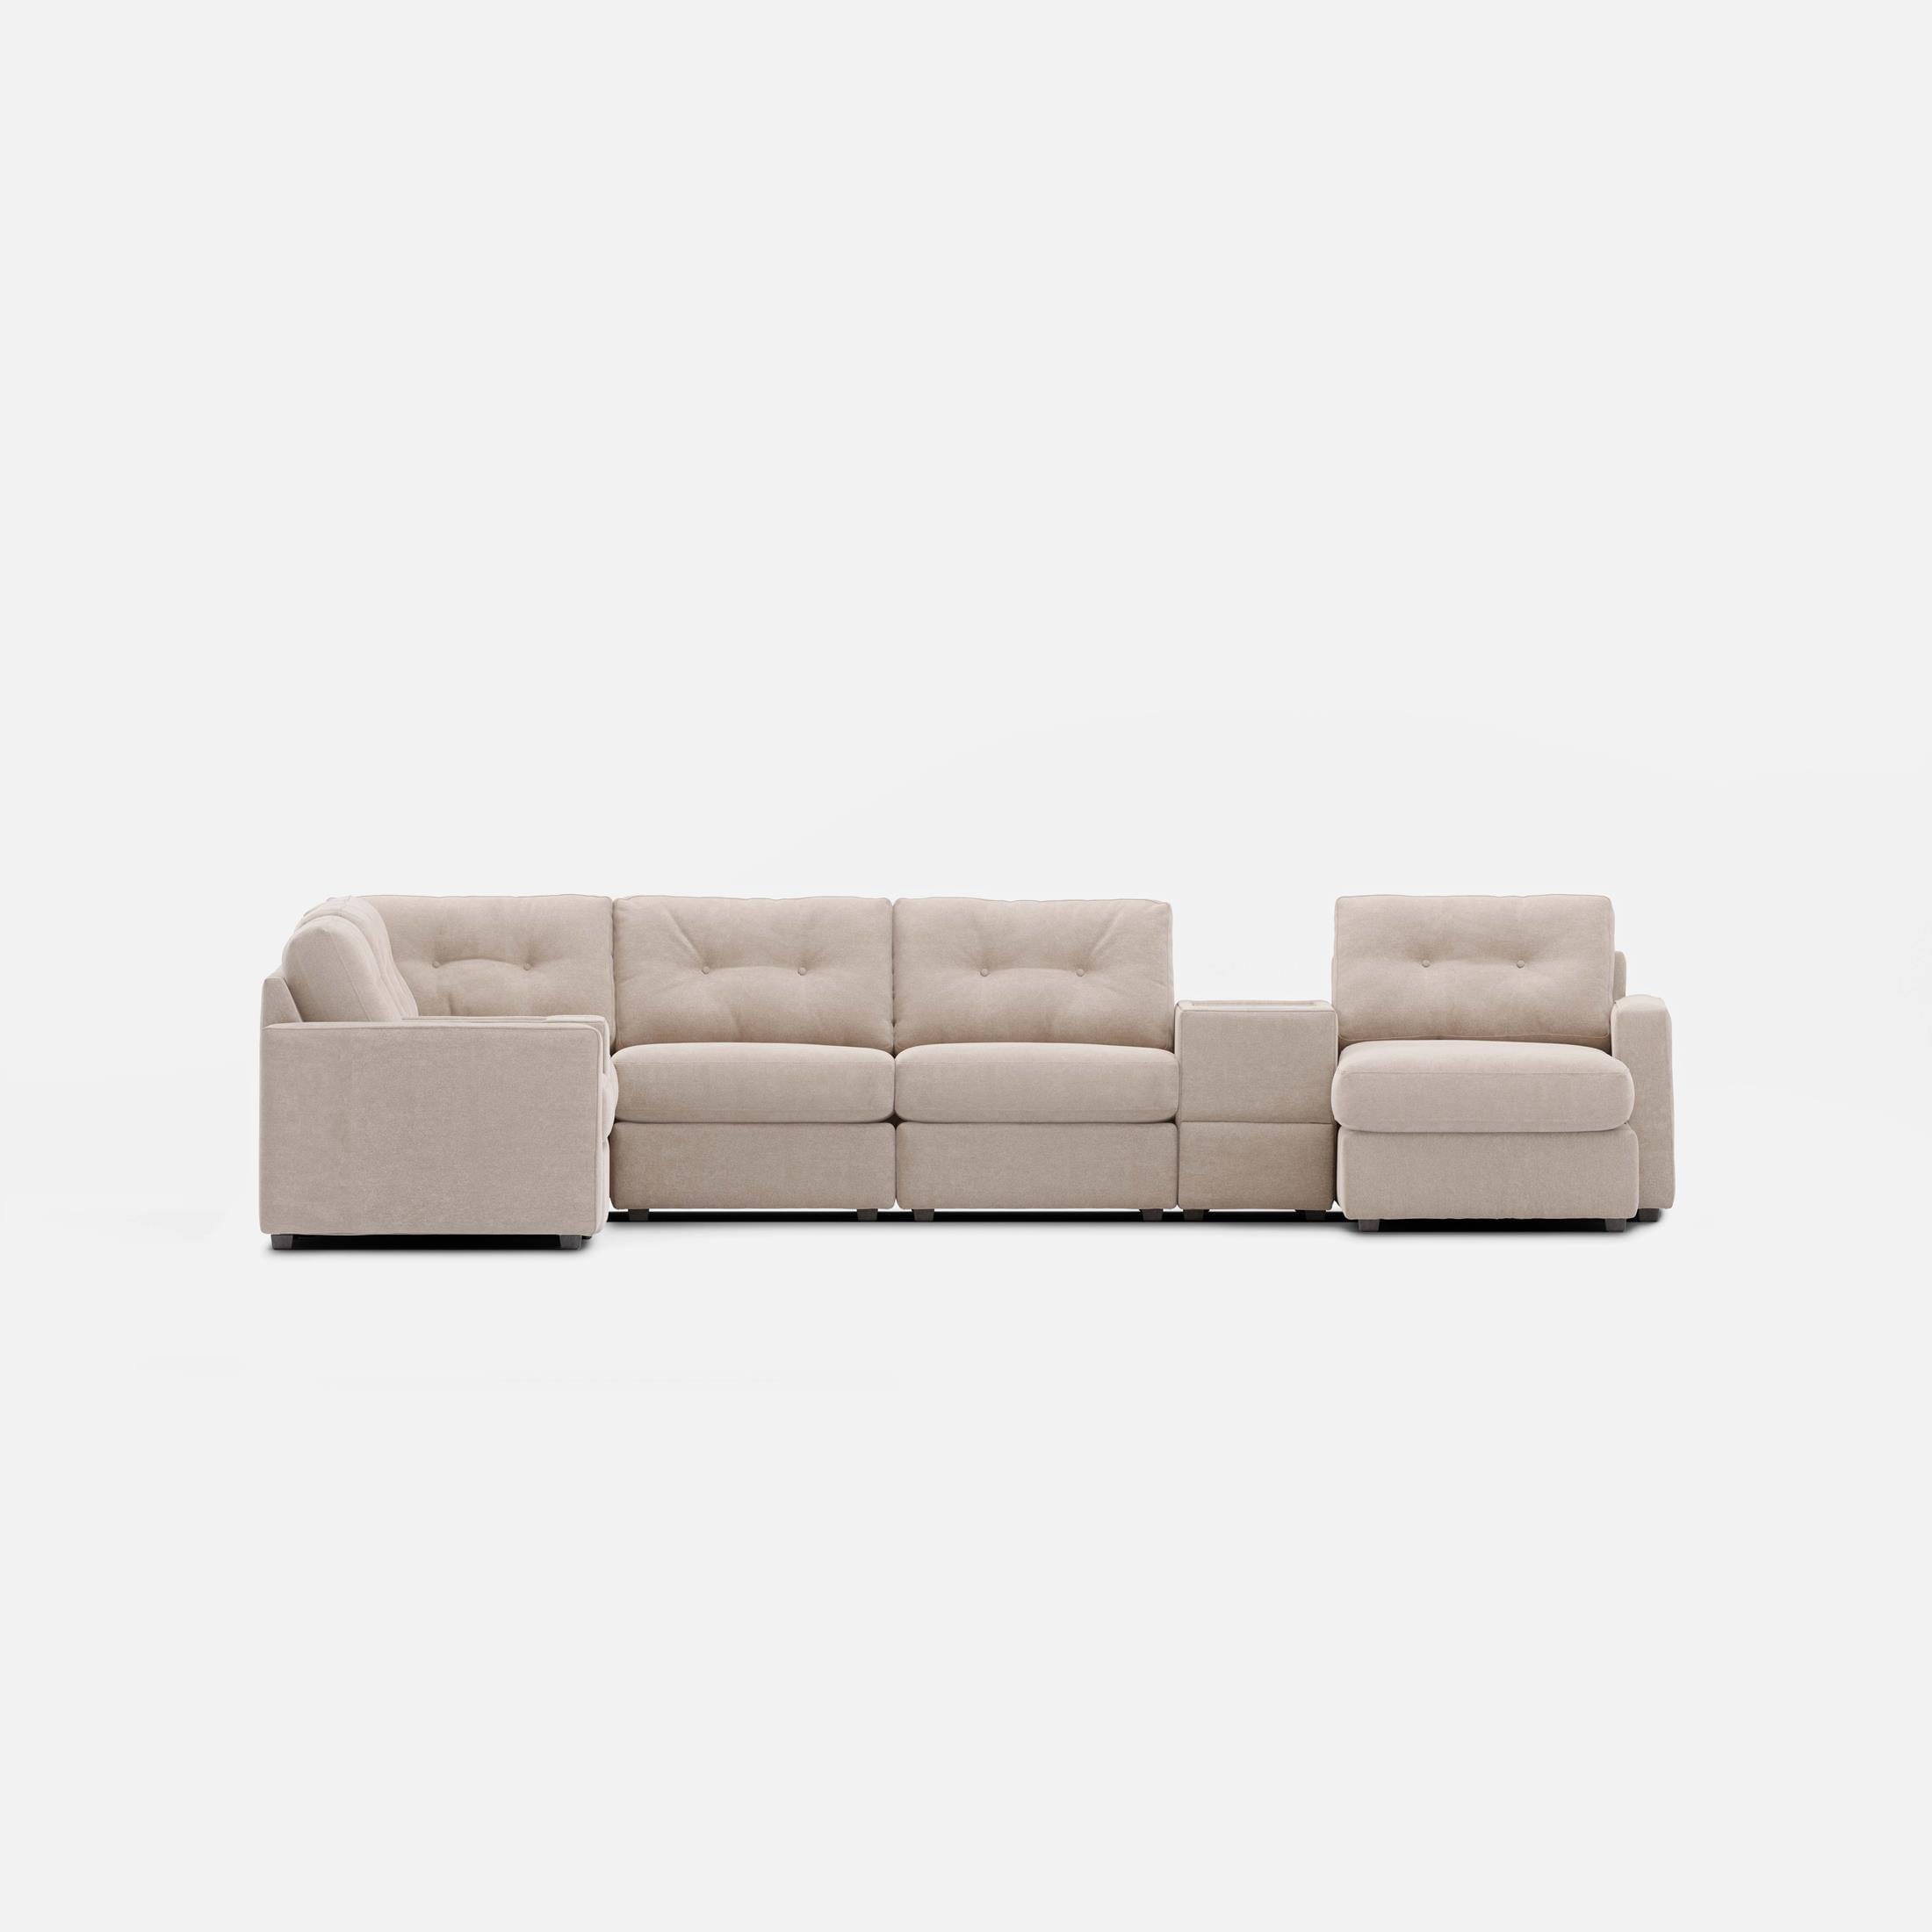 Modular One Right Facing 8-Piece Sectional - Stone